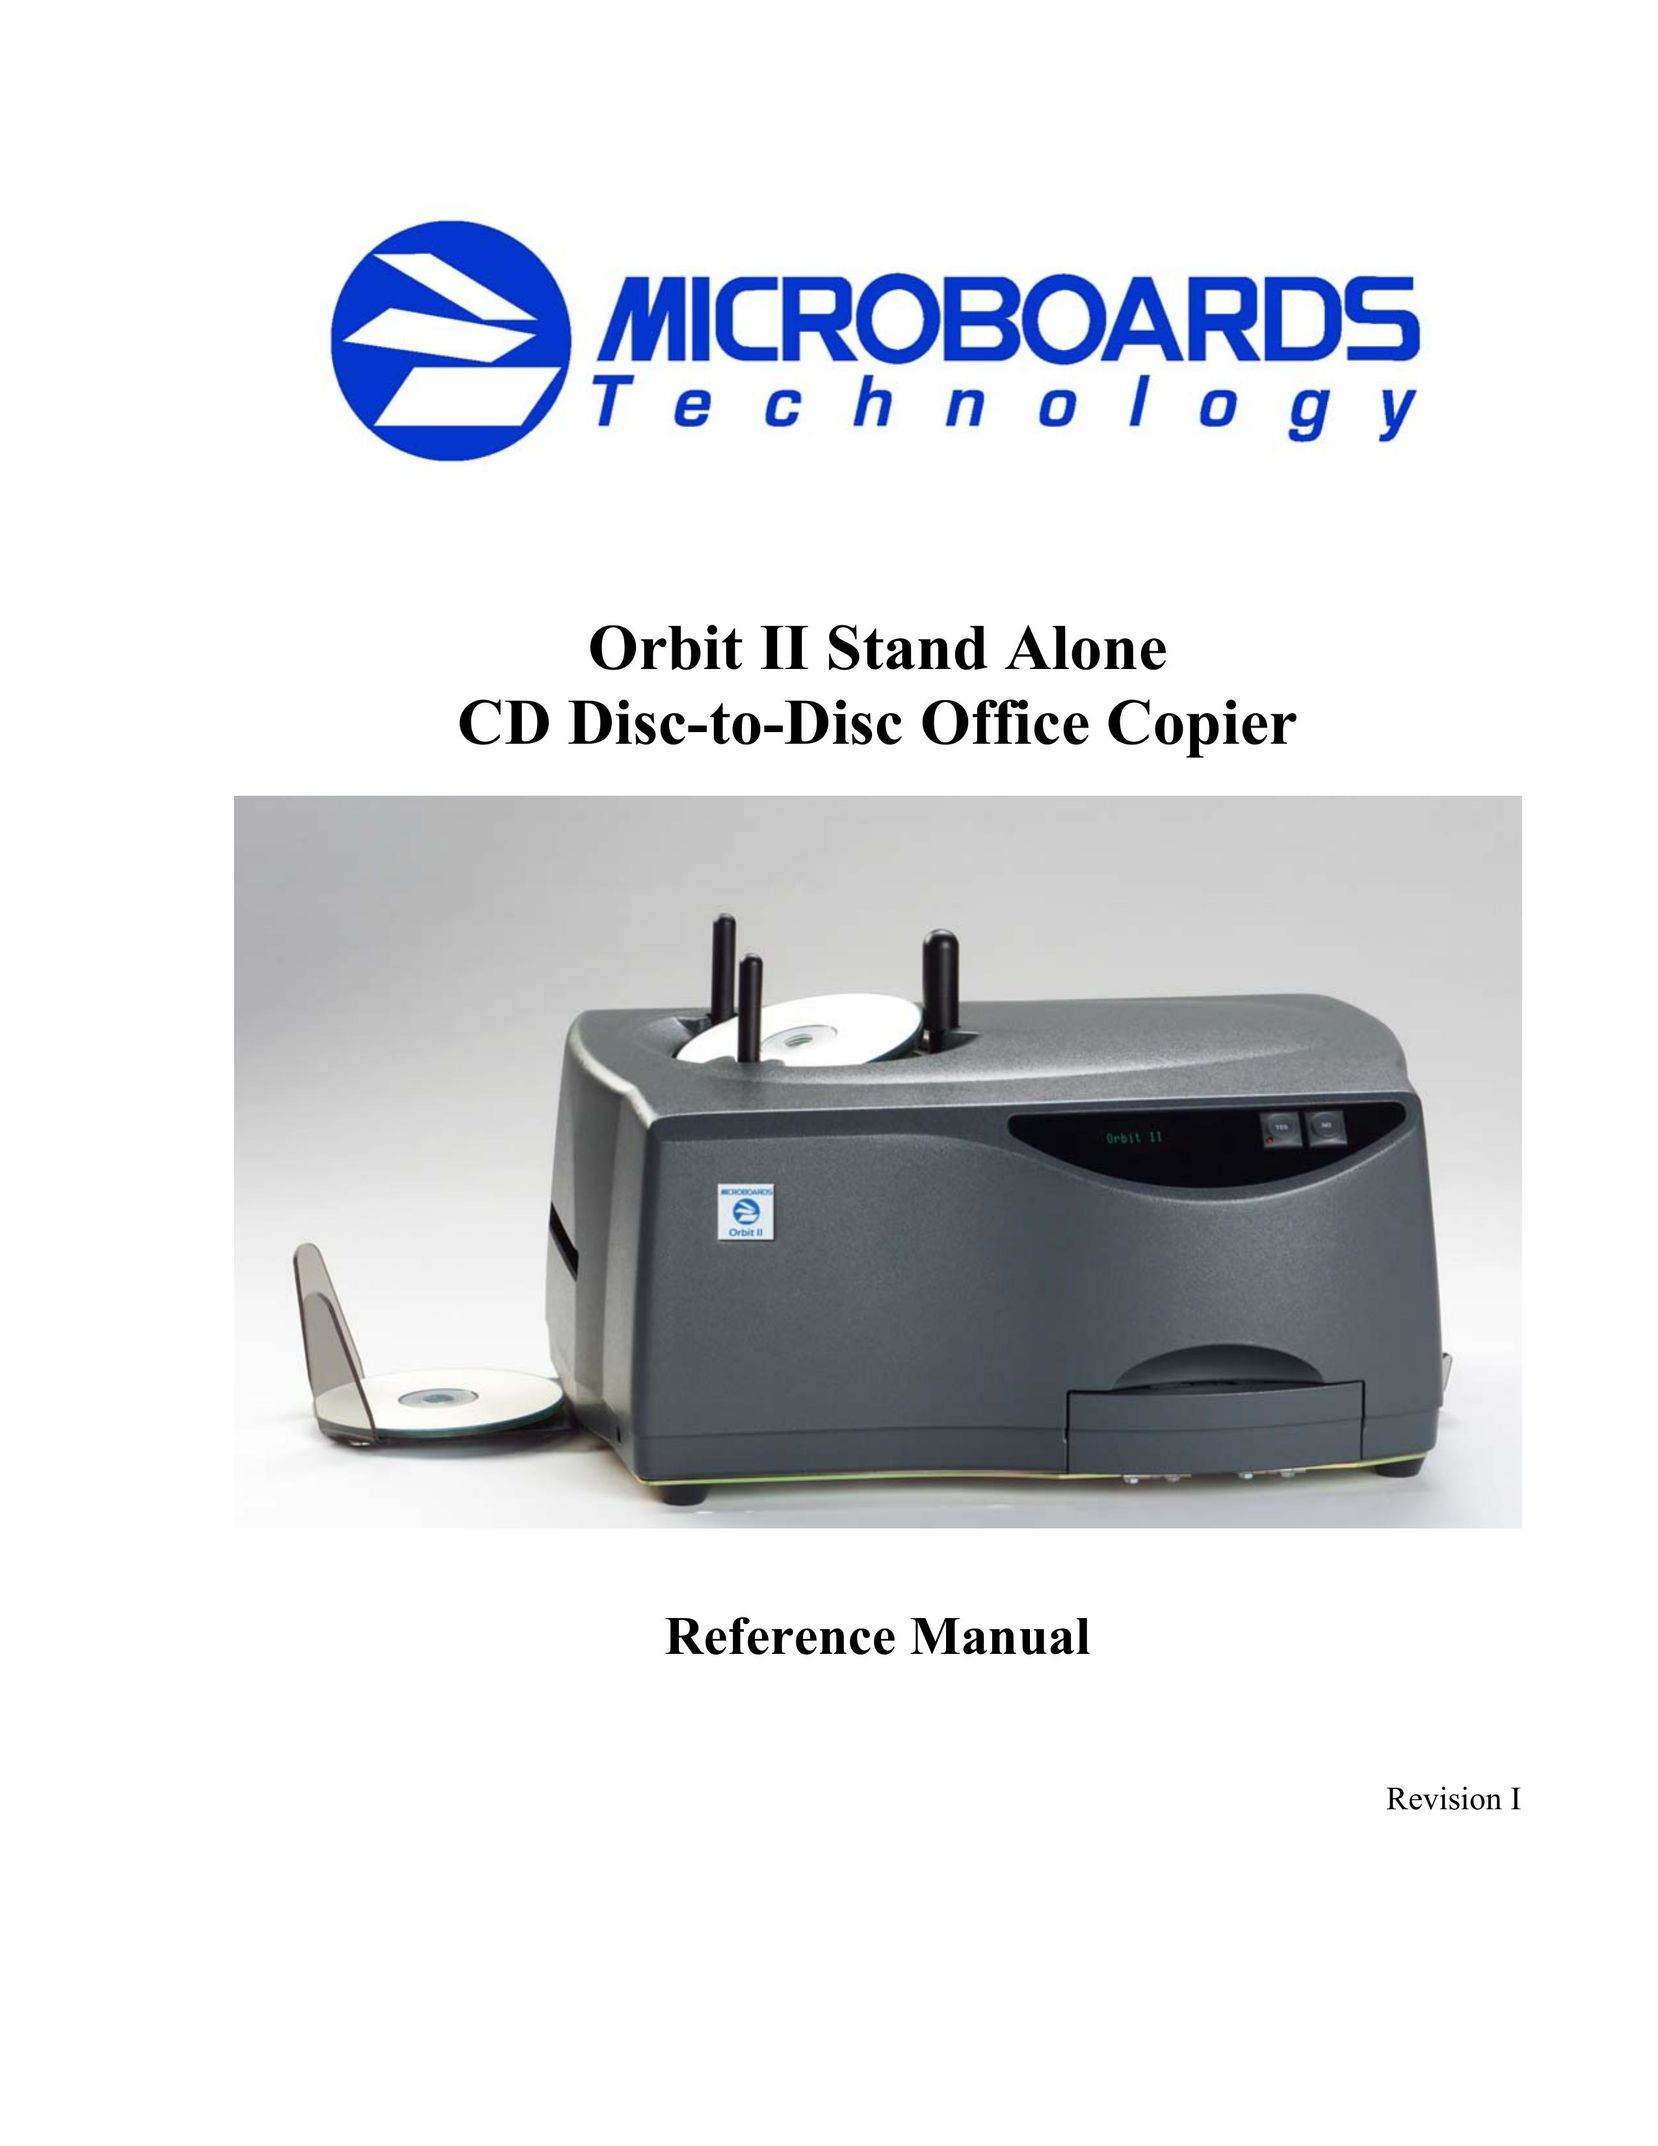 MicroBoards Technology II All in One Printer User Manual